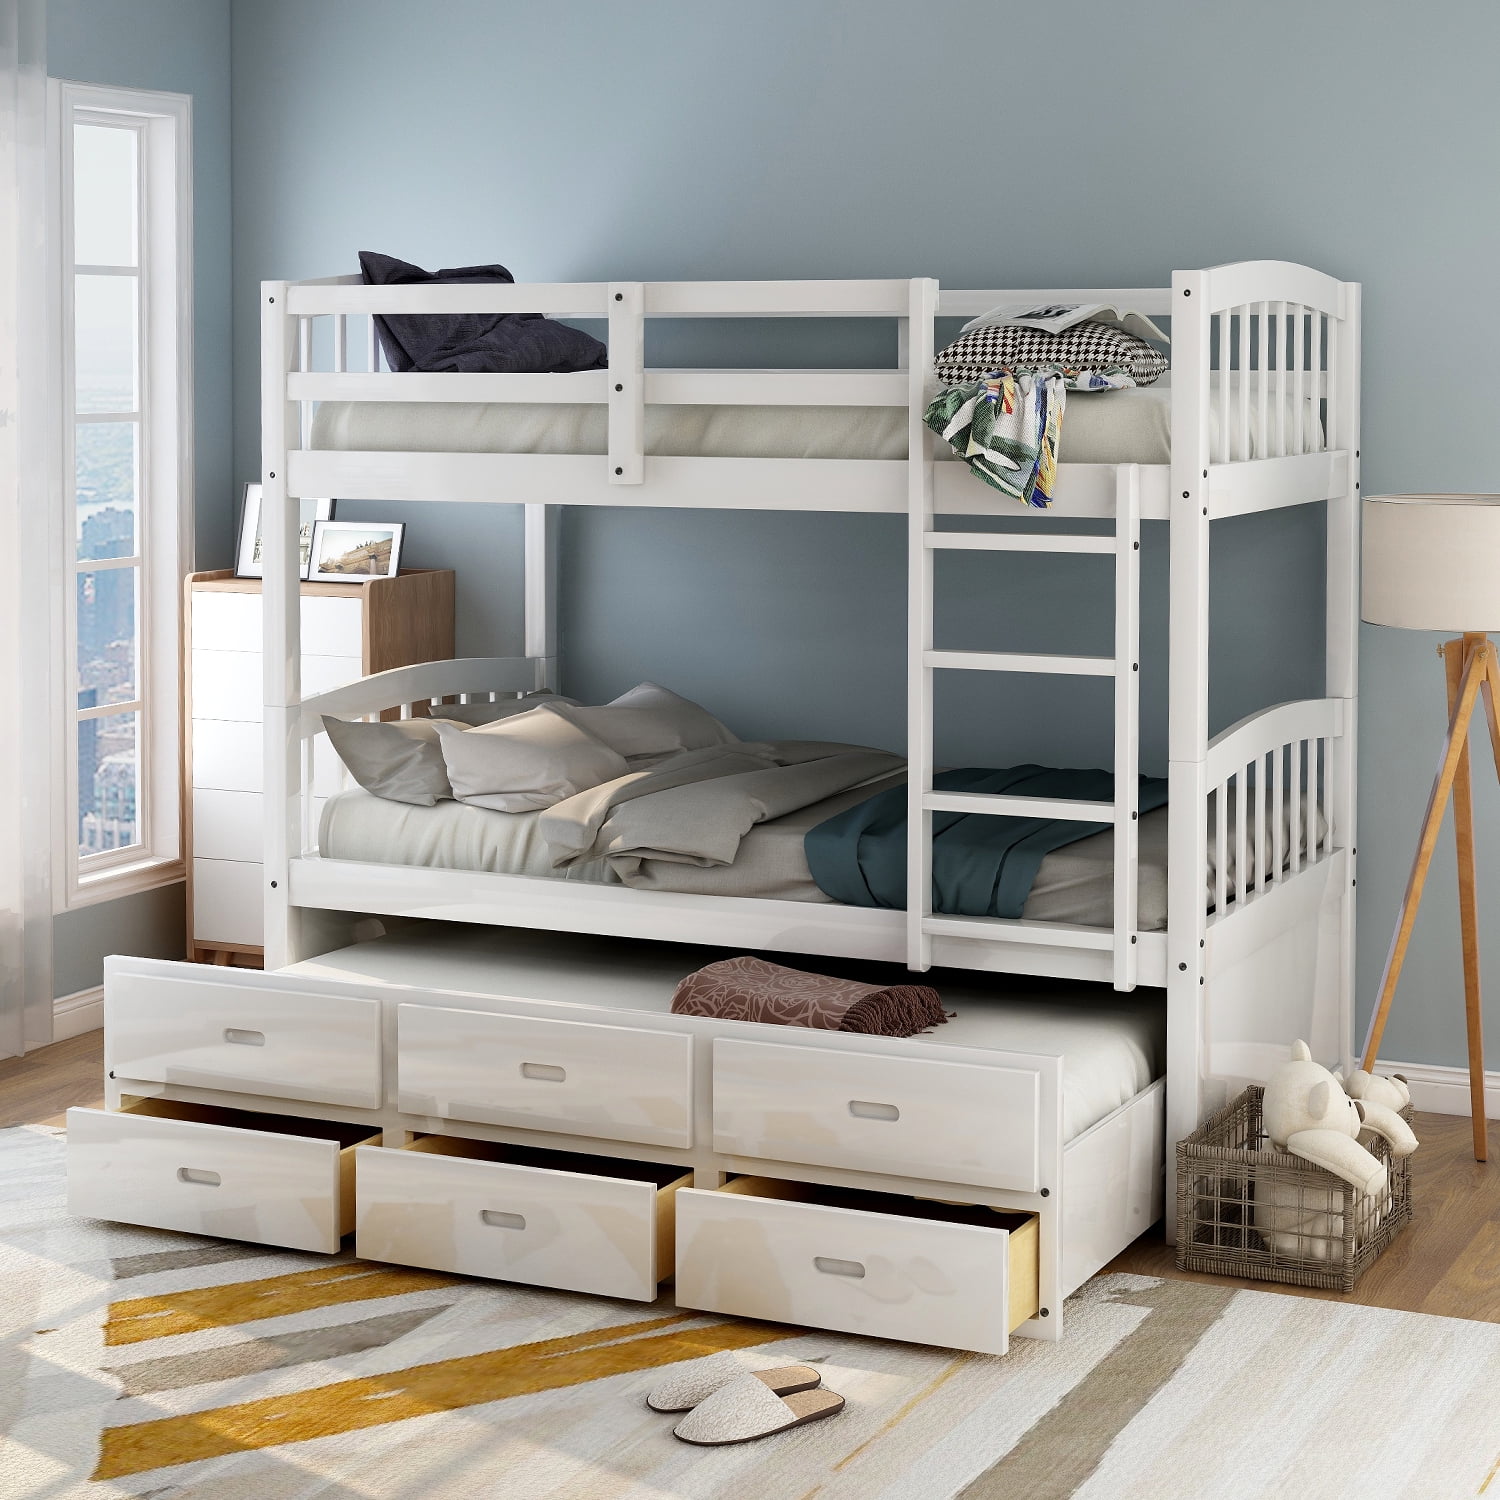 Euroco Twin Over Wood Bunk Bed, Twin Over Twin Bunk Beds With Storage